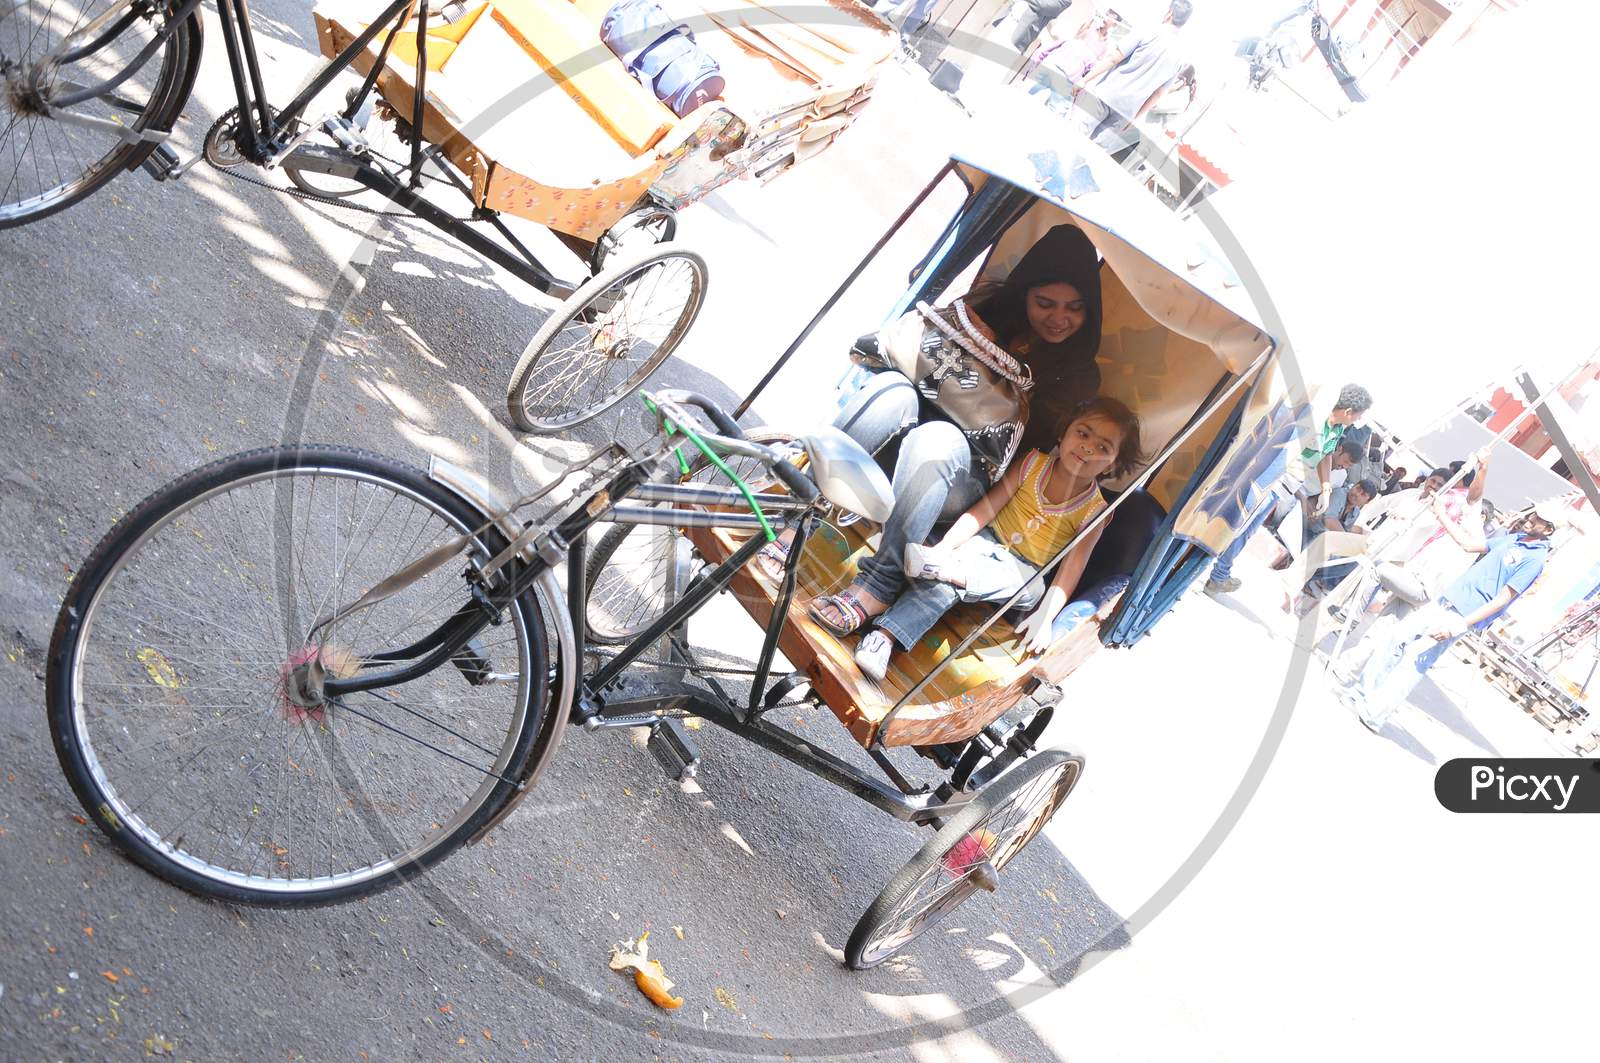 Indian Mother And Daughter Sitting In a Rickshaw in a market